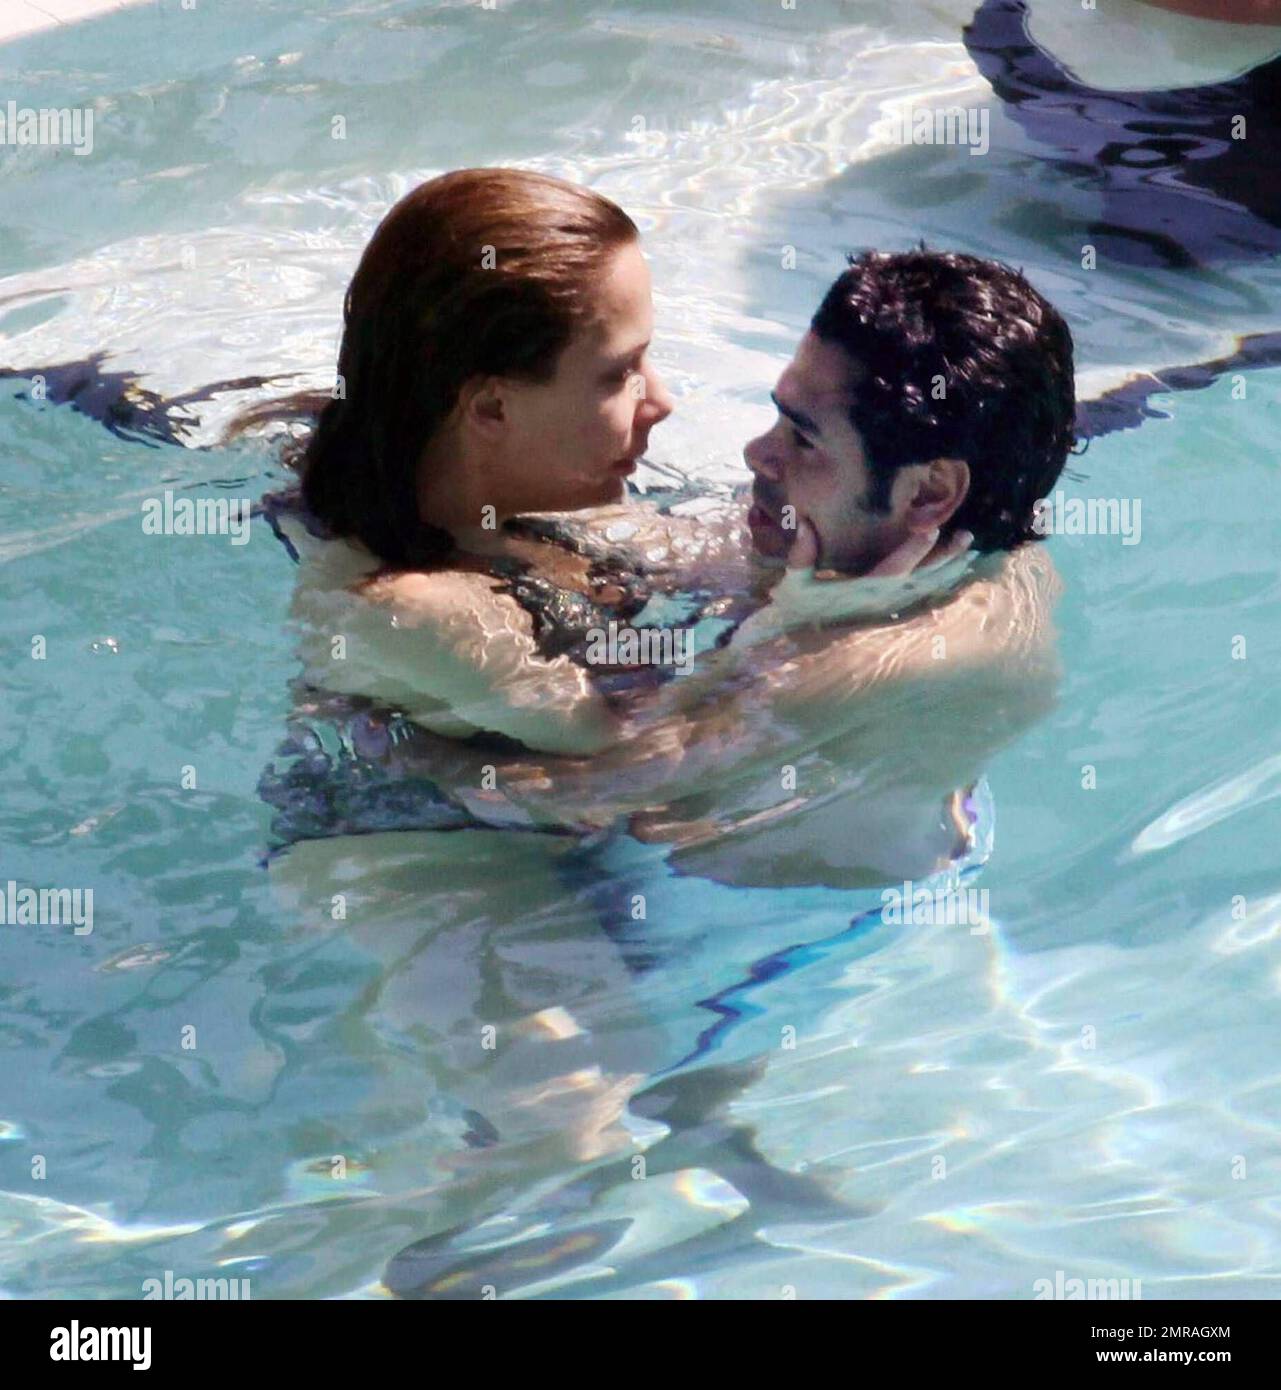 Exclusive!! French actor Jamel Debbouze and wife Melissa Theuriau kiss and cuddle in the pool at their exclusive Miami Beach hotel. Miami, FL 2/23/09 Stock Photo